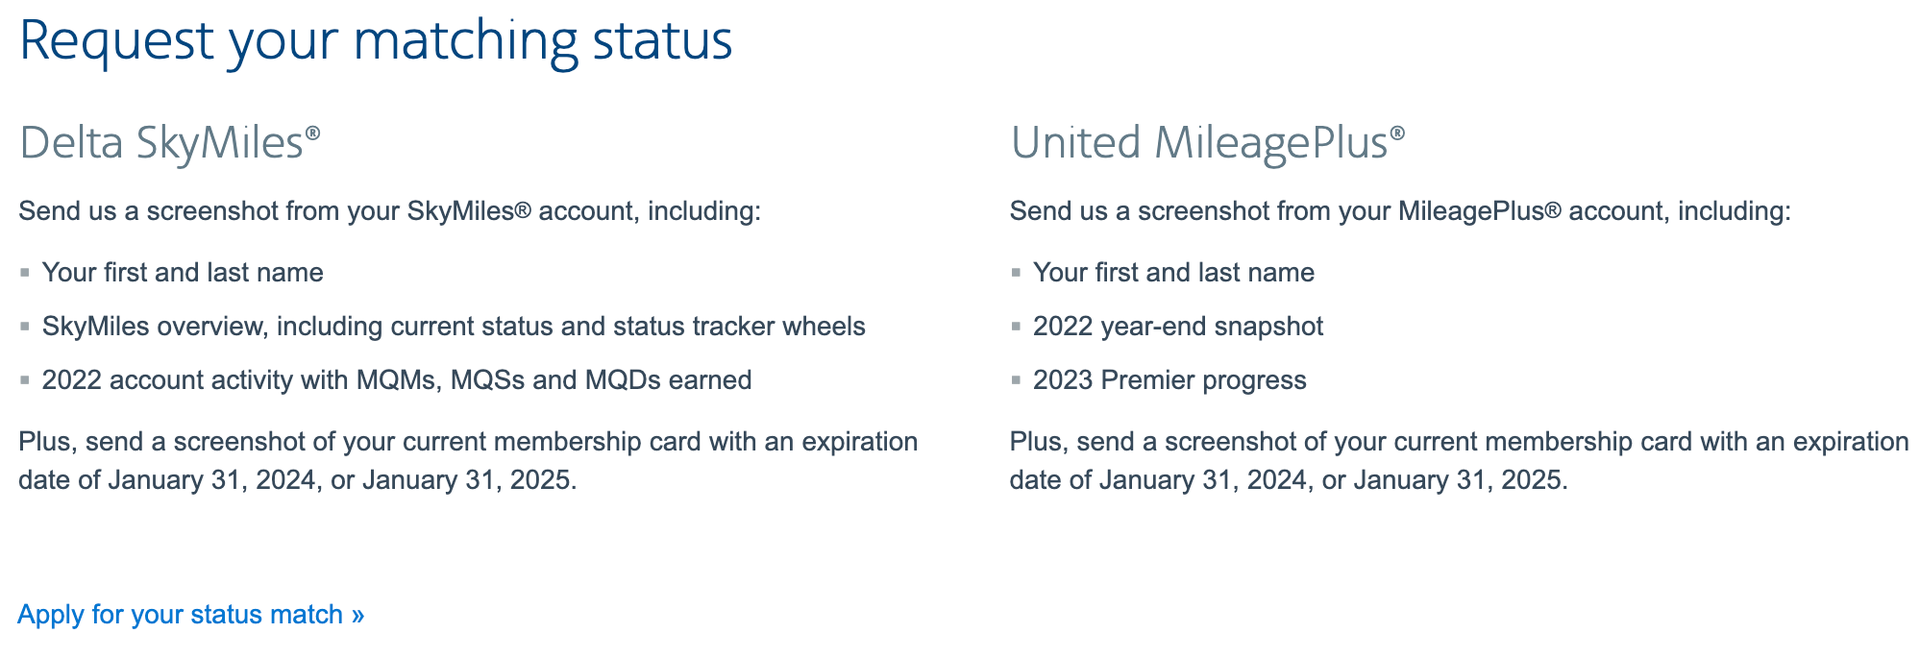 American Airlines has a new status challenge for uppertier United and